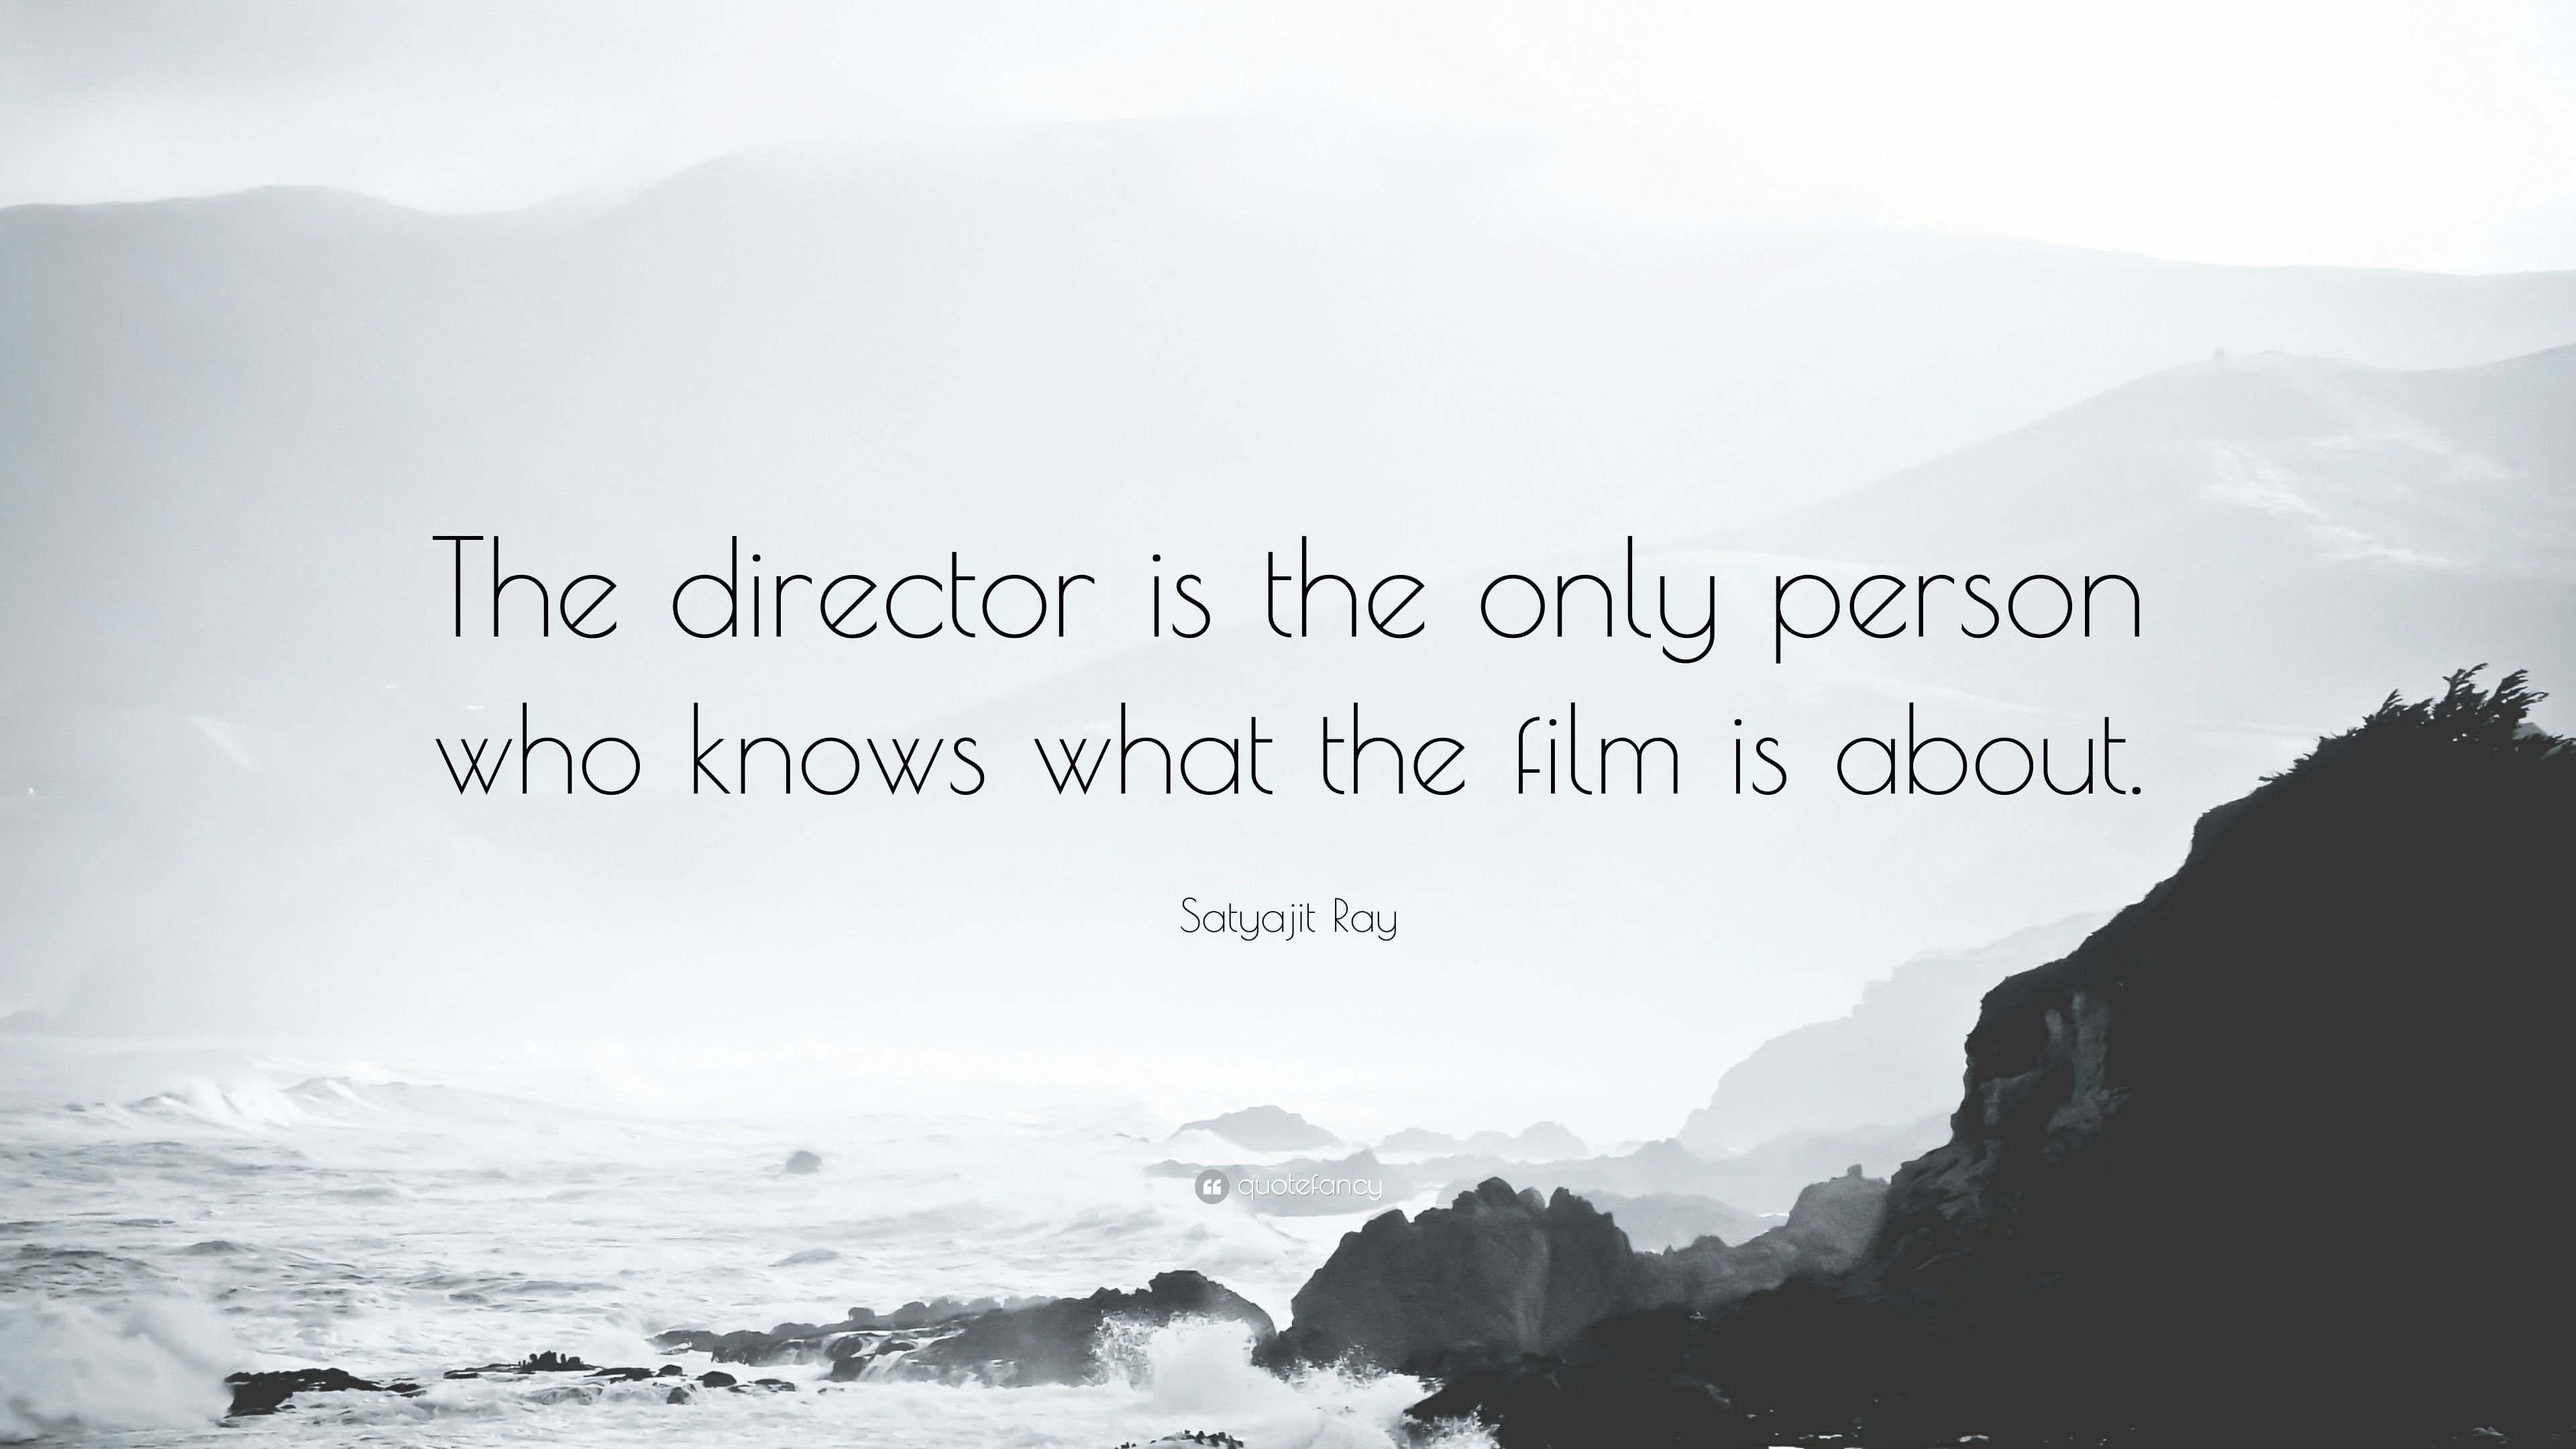 Satyajit Ray Quote: “The director is the only person who knows